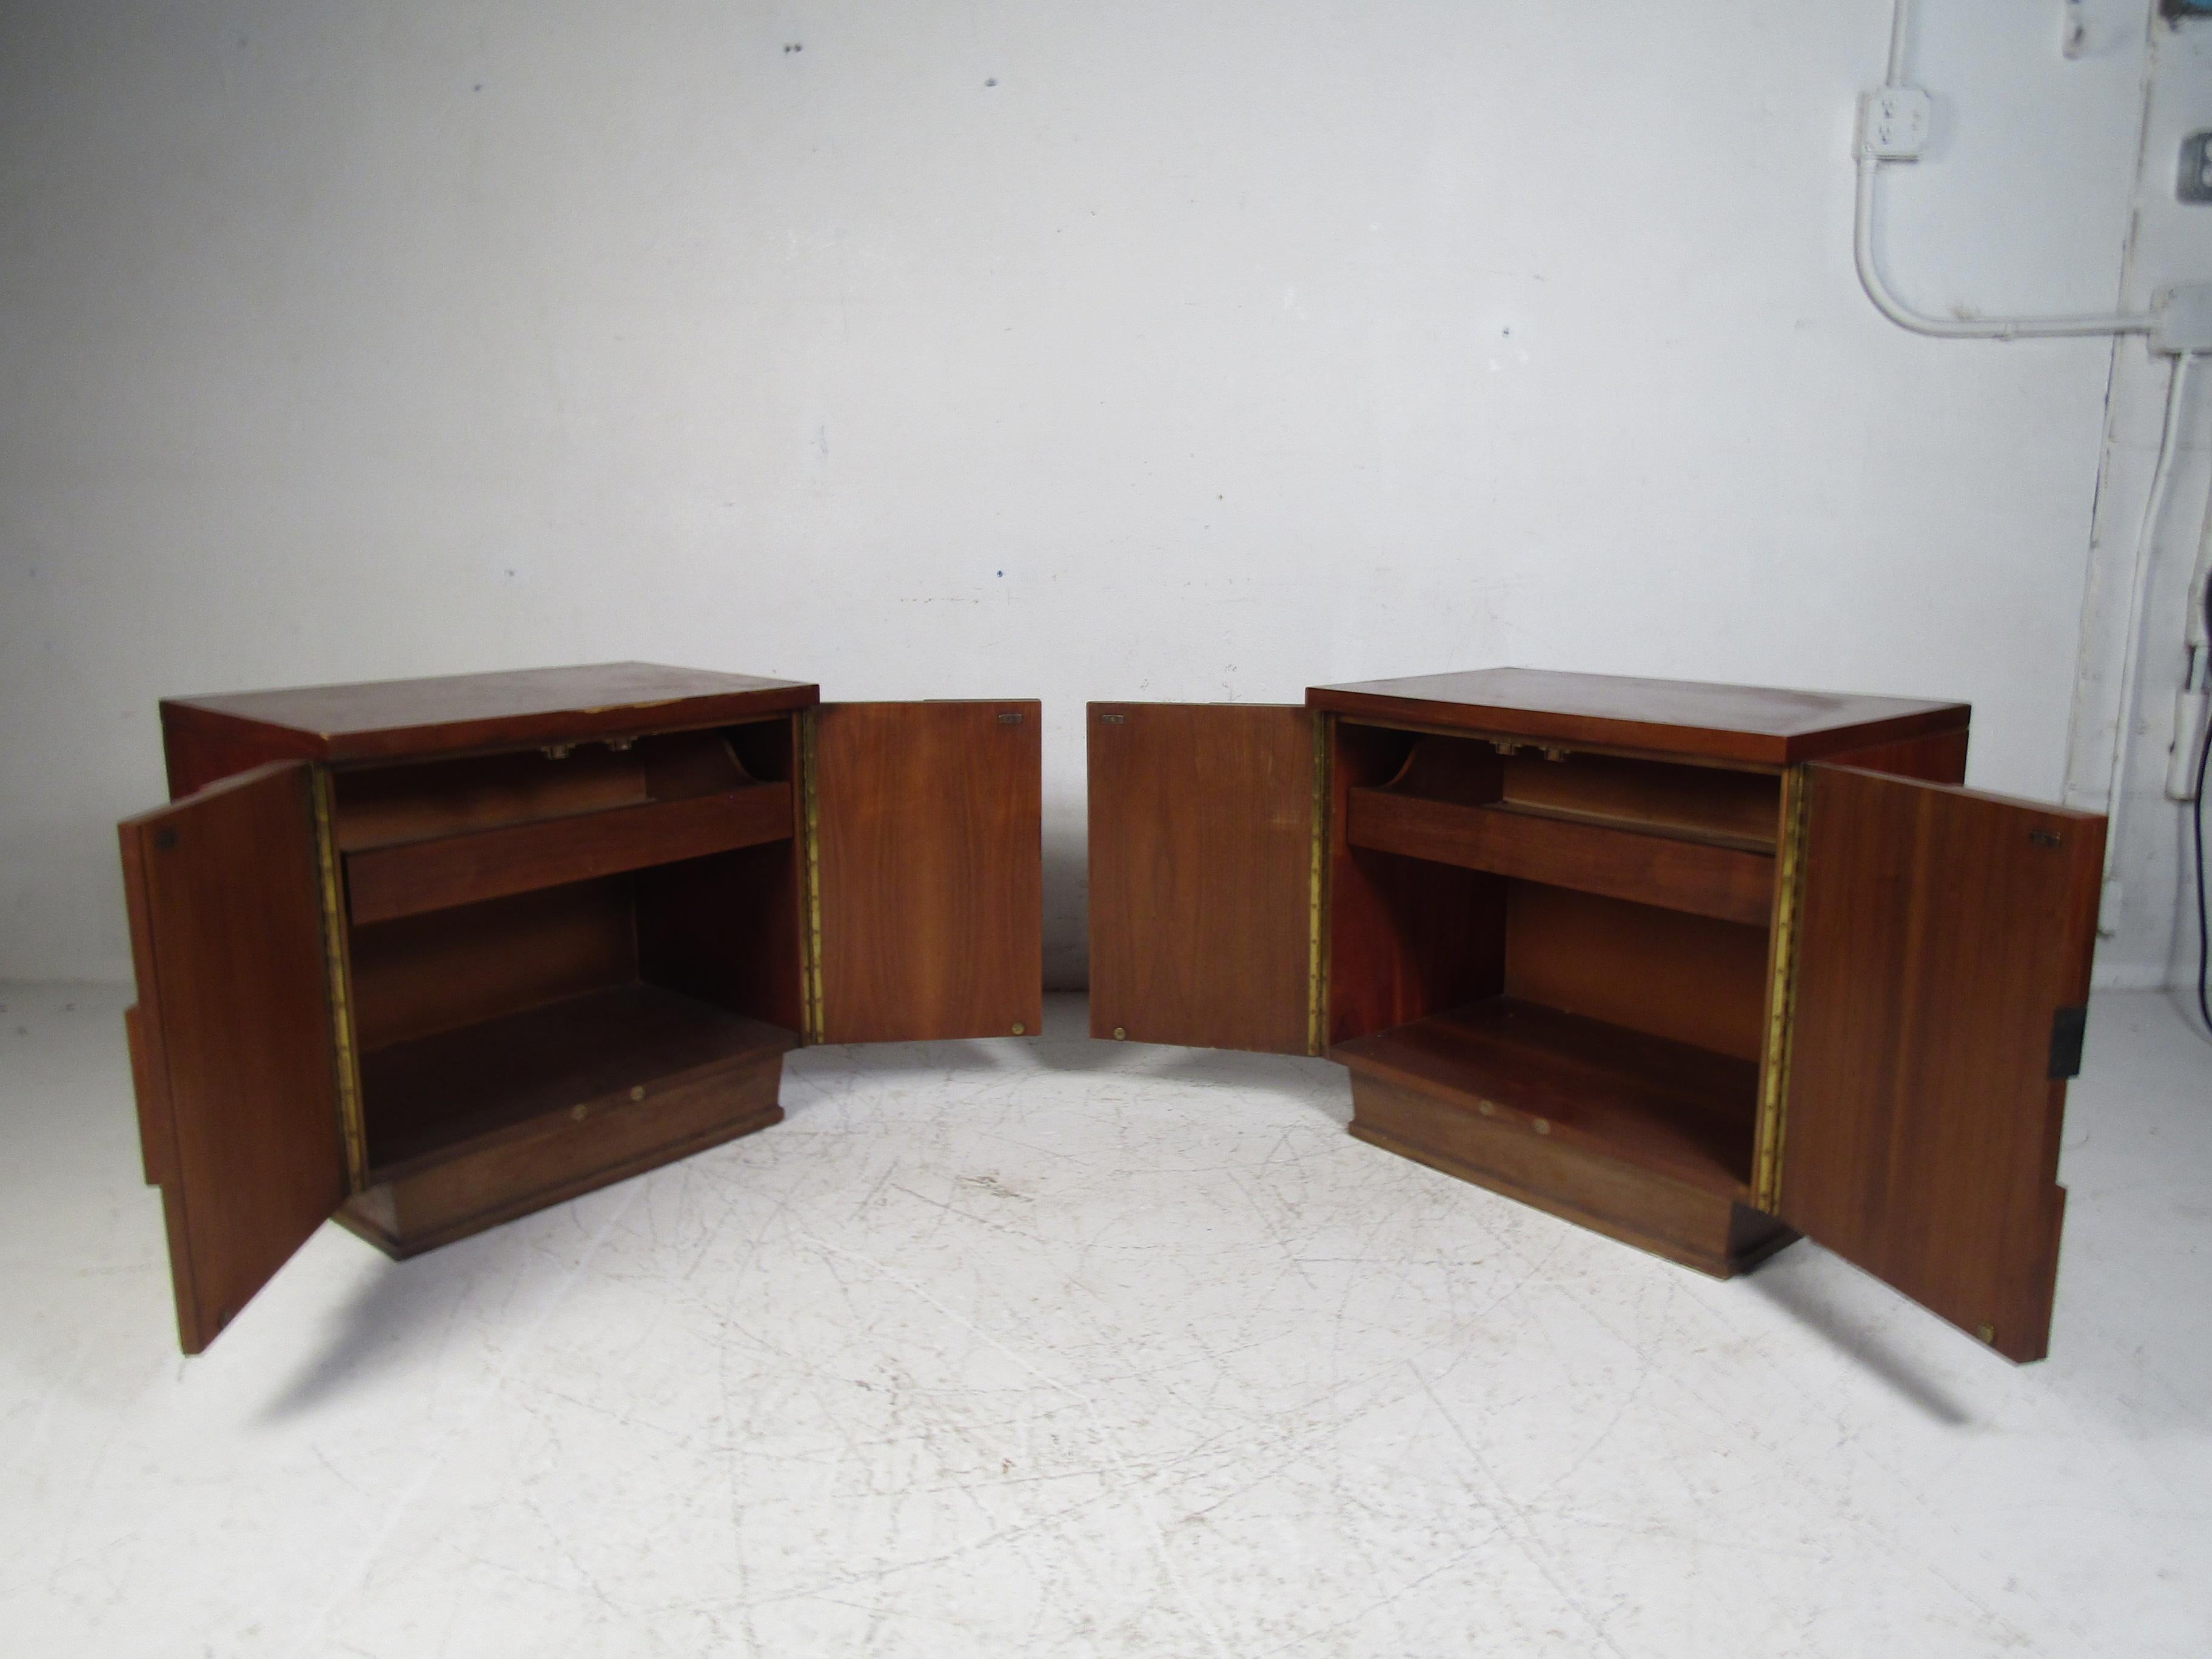 Veneer Pair of Midcentury Brutalist Style Nightstands by Young Manufacturing Co.